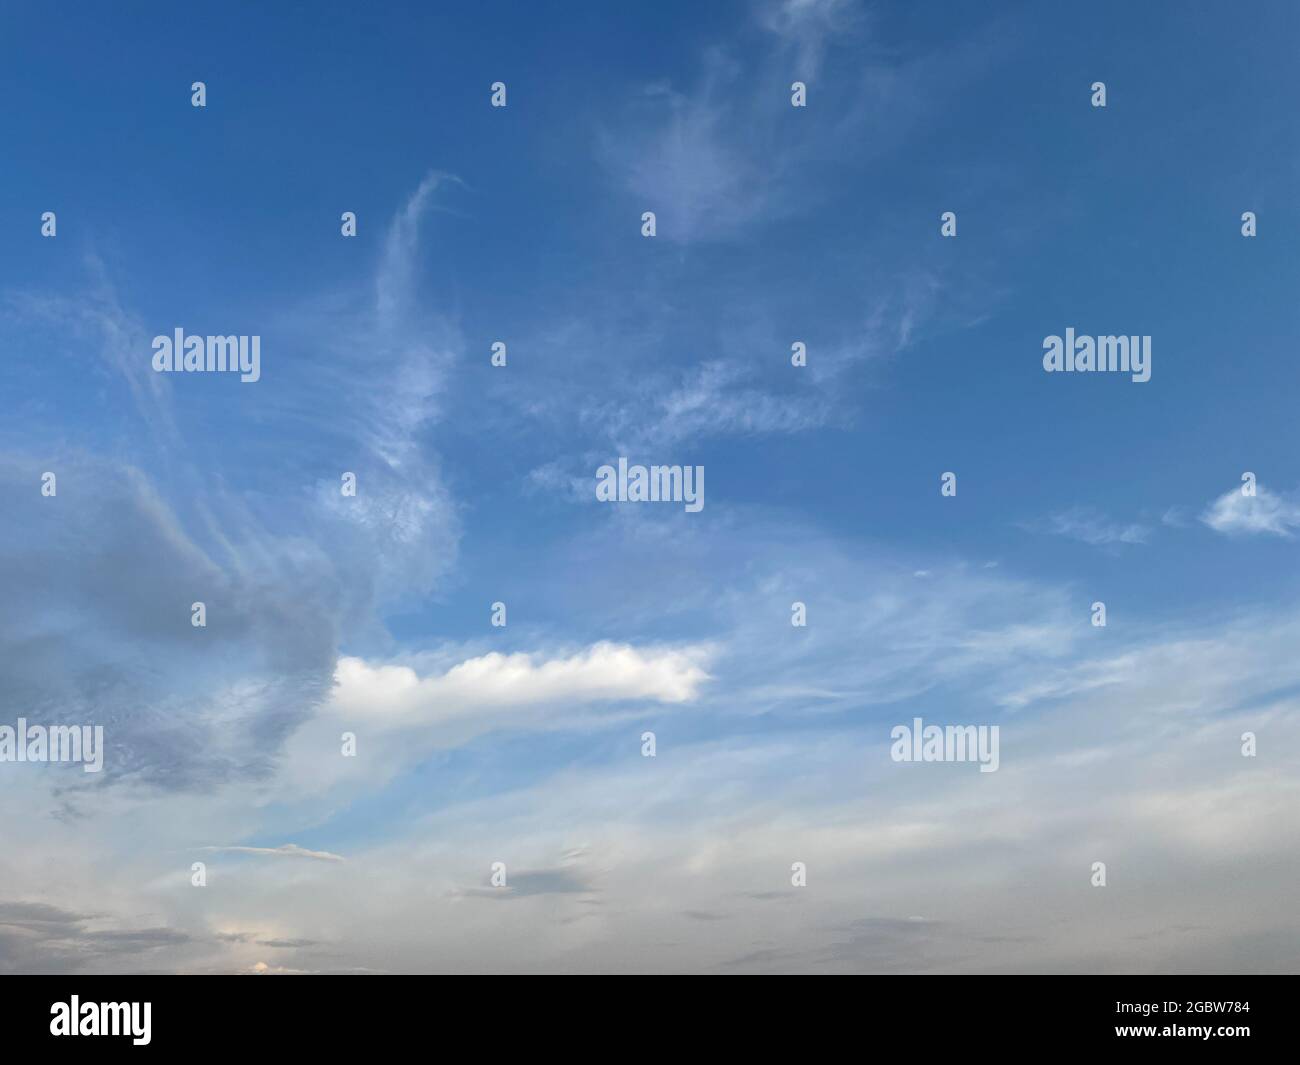 Pattern of clouds forming in blue sky creating an abstract background Stock Photo